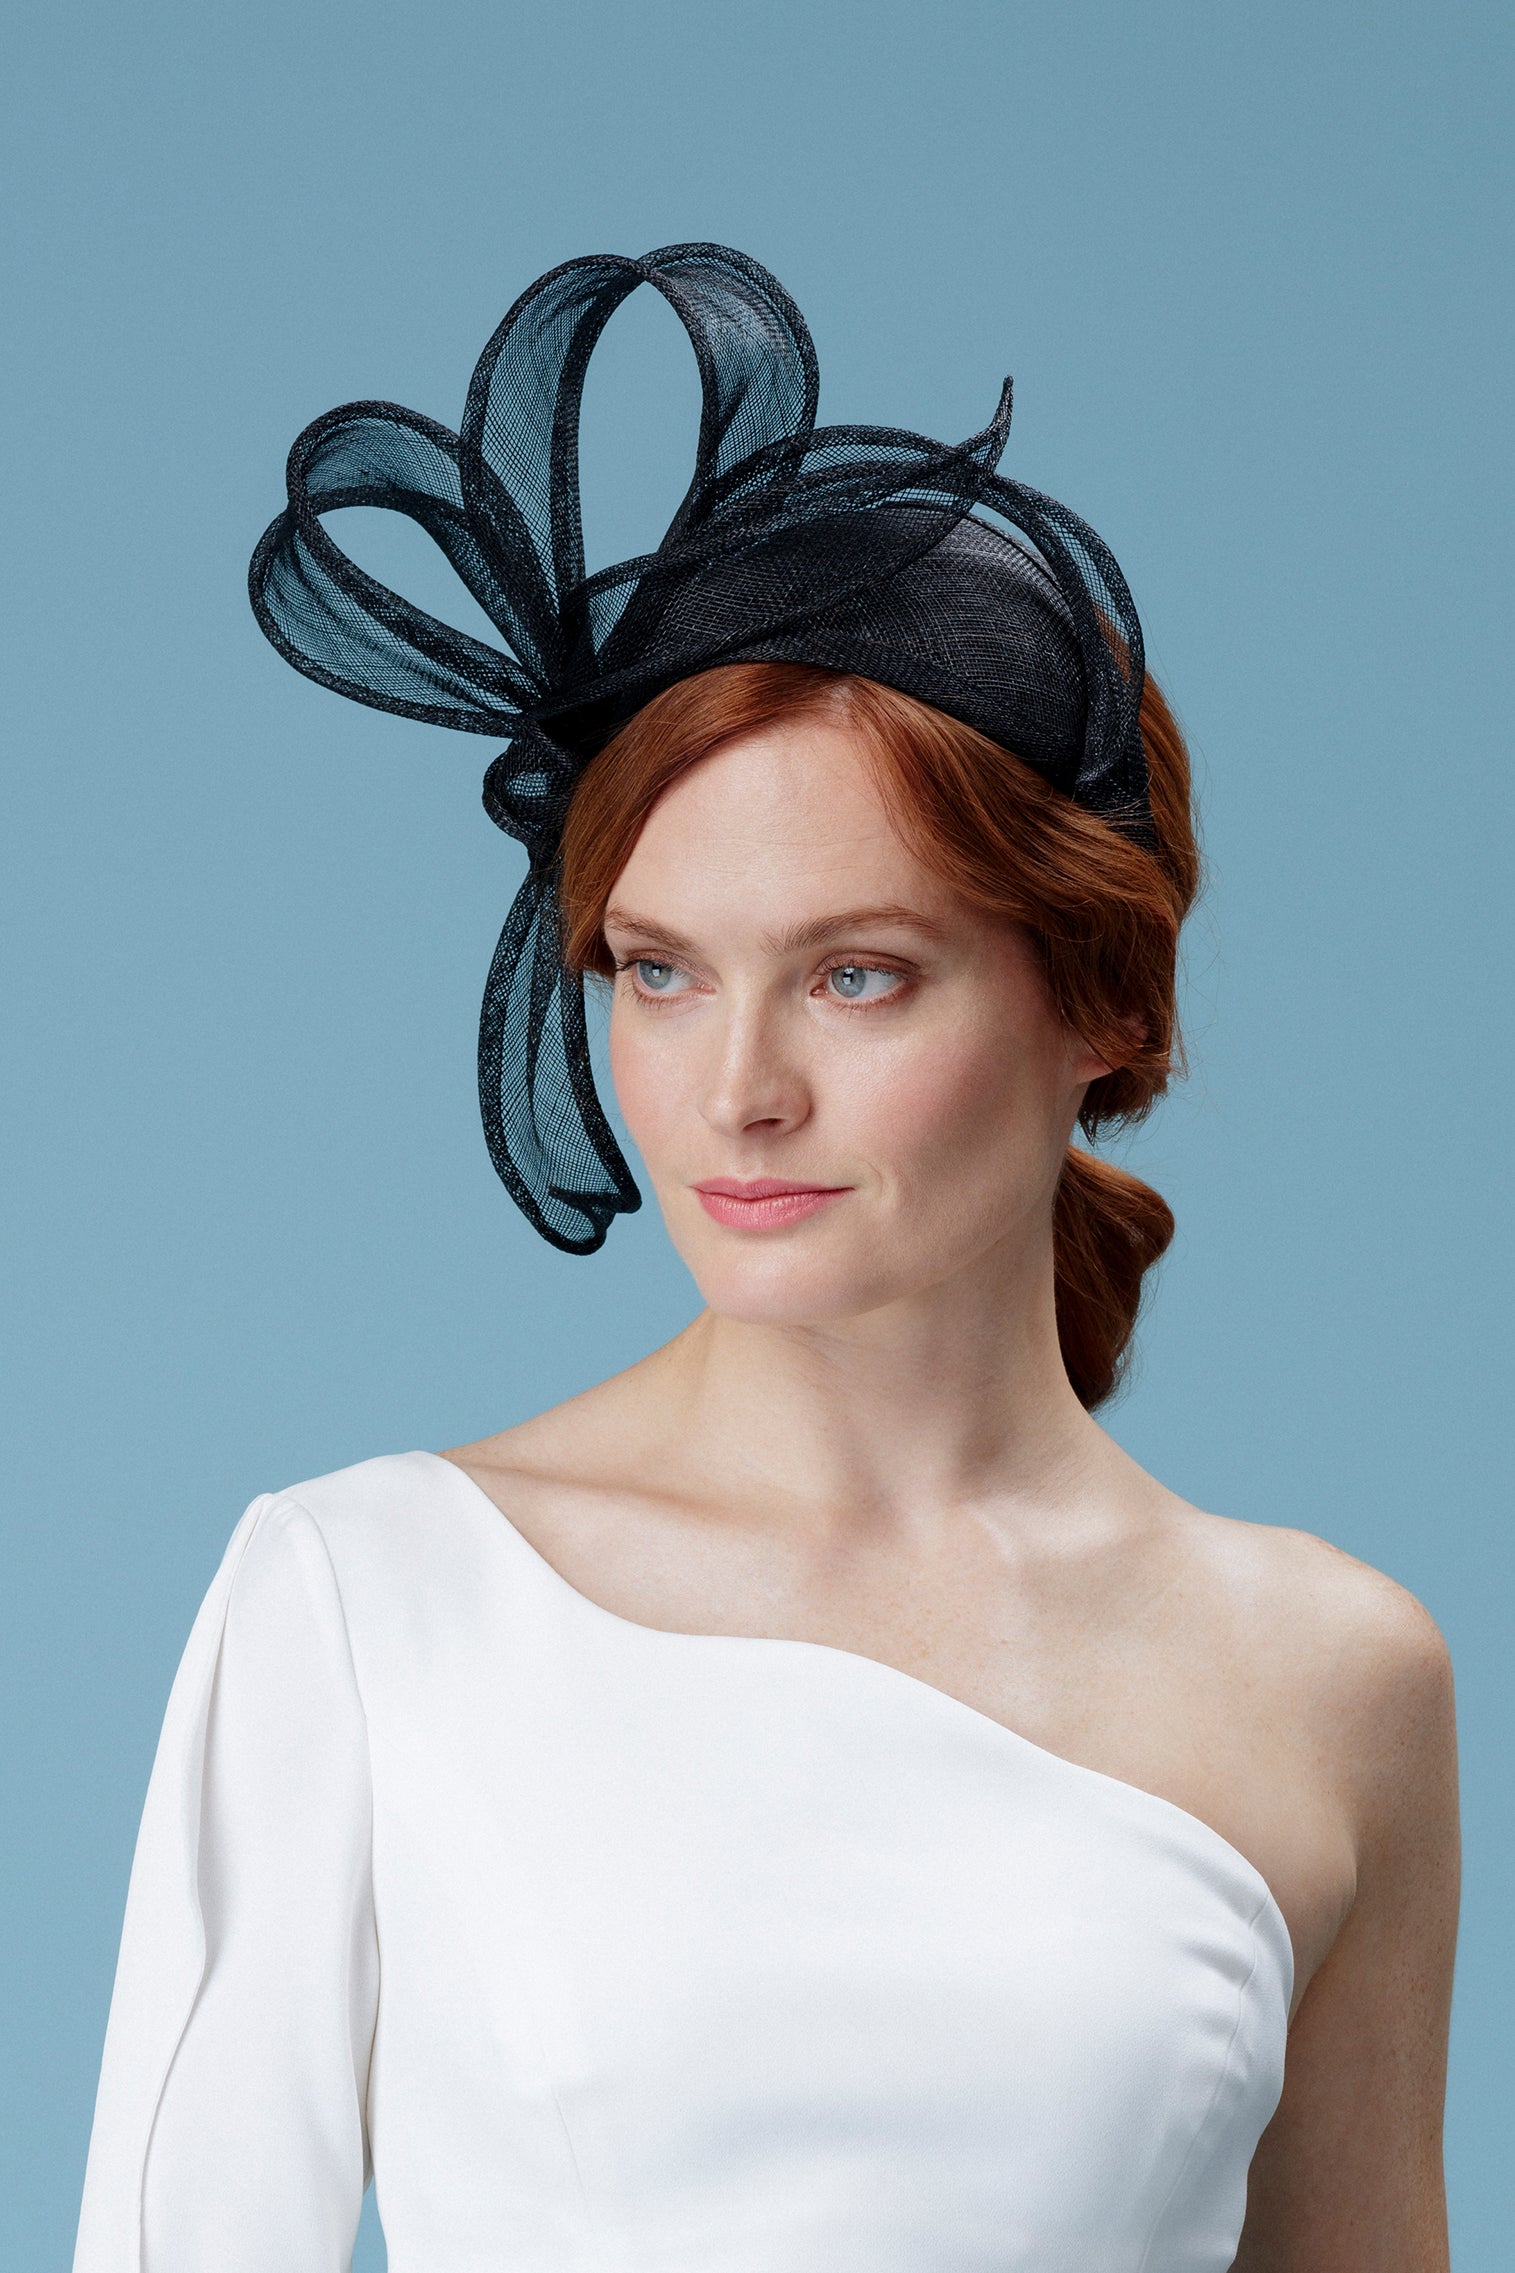 Rosemary Black Headband - Lock Couture by Awon Golding - Lock & Co. Hatters London UK